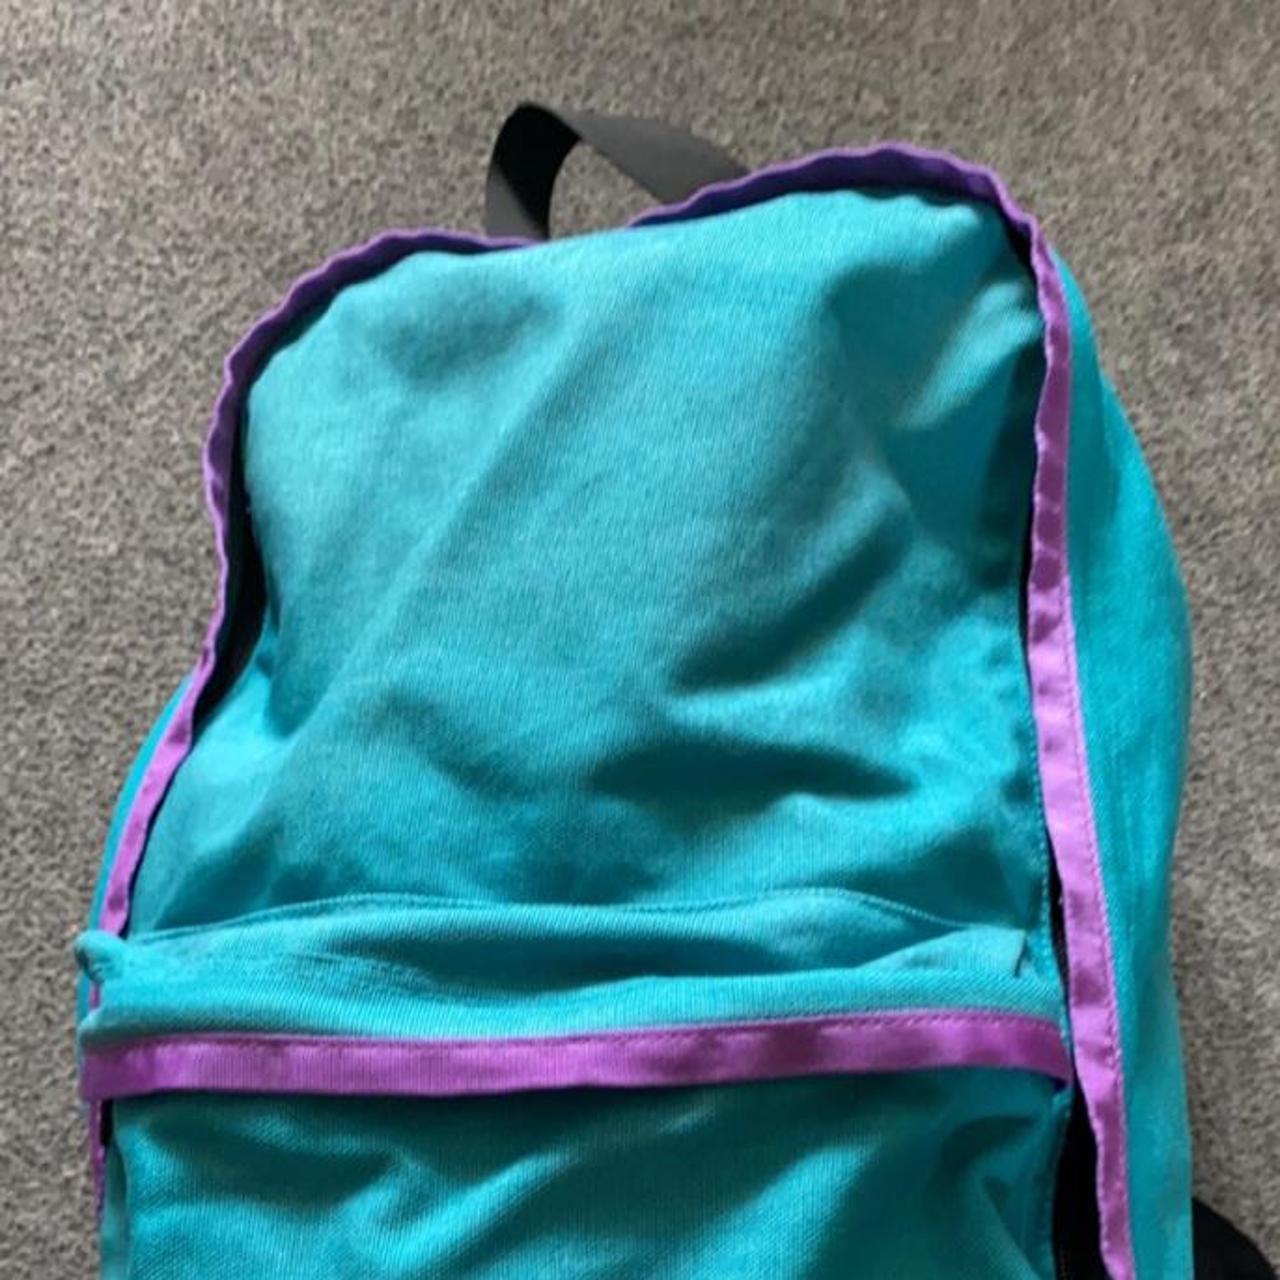 The North Face Purple Label Women's Purple and Blue Bag (2)